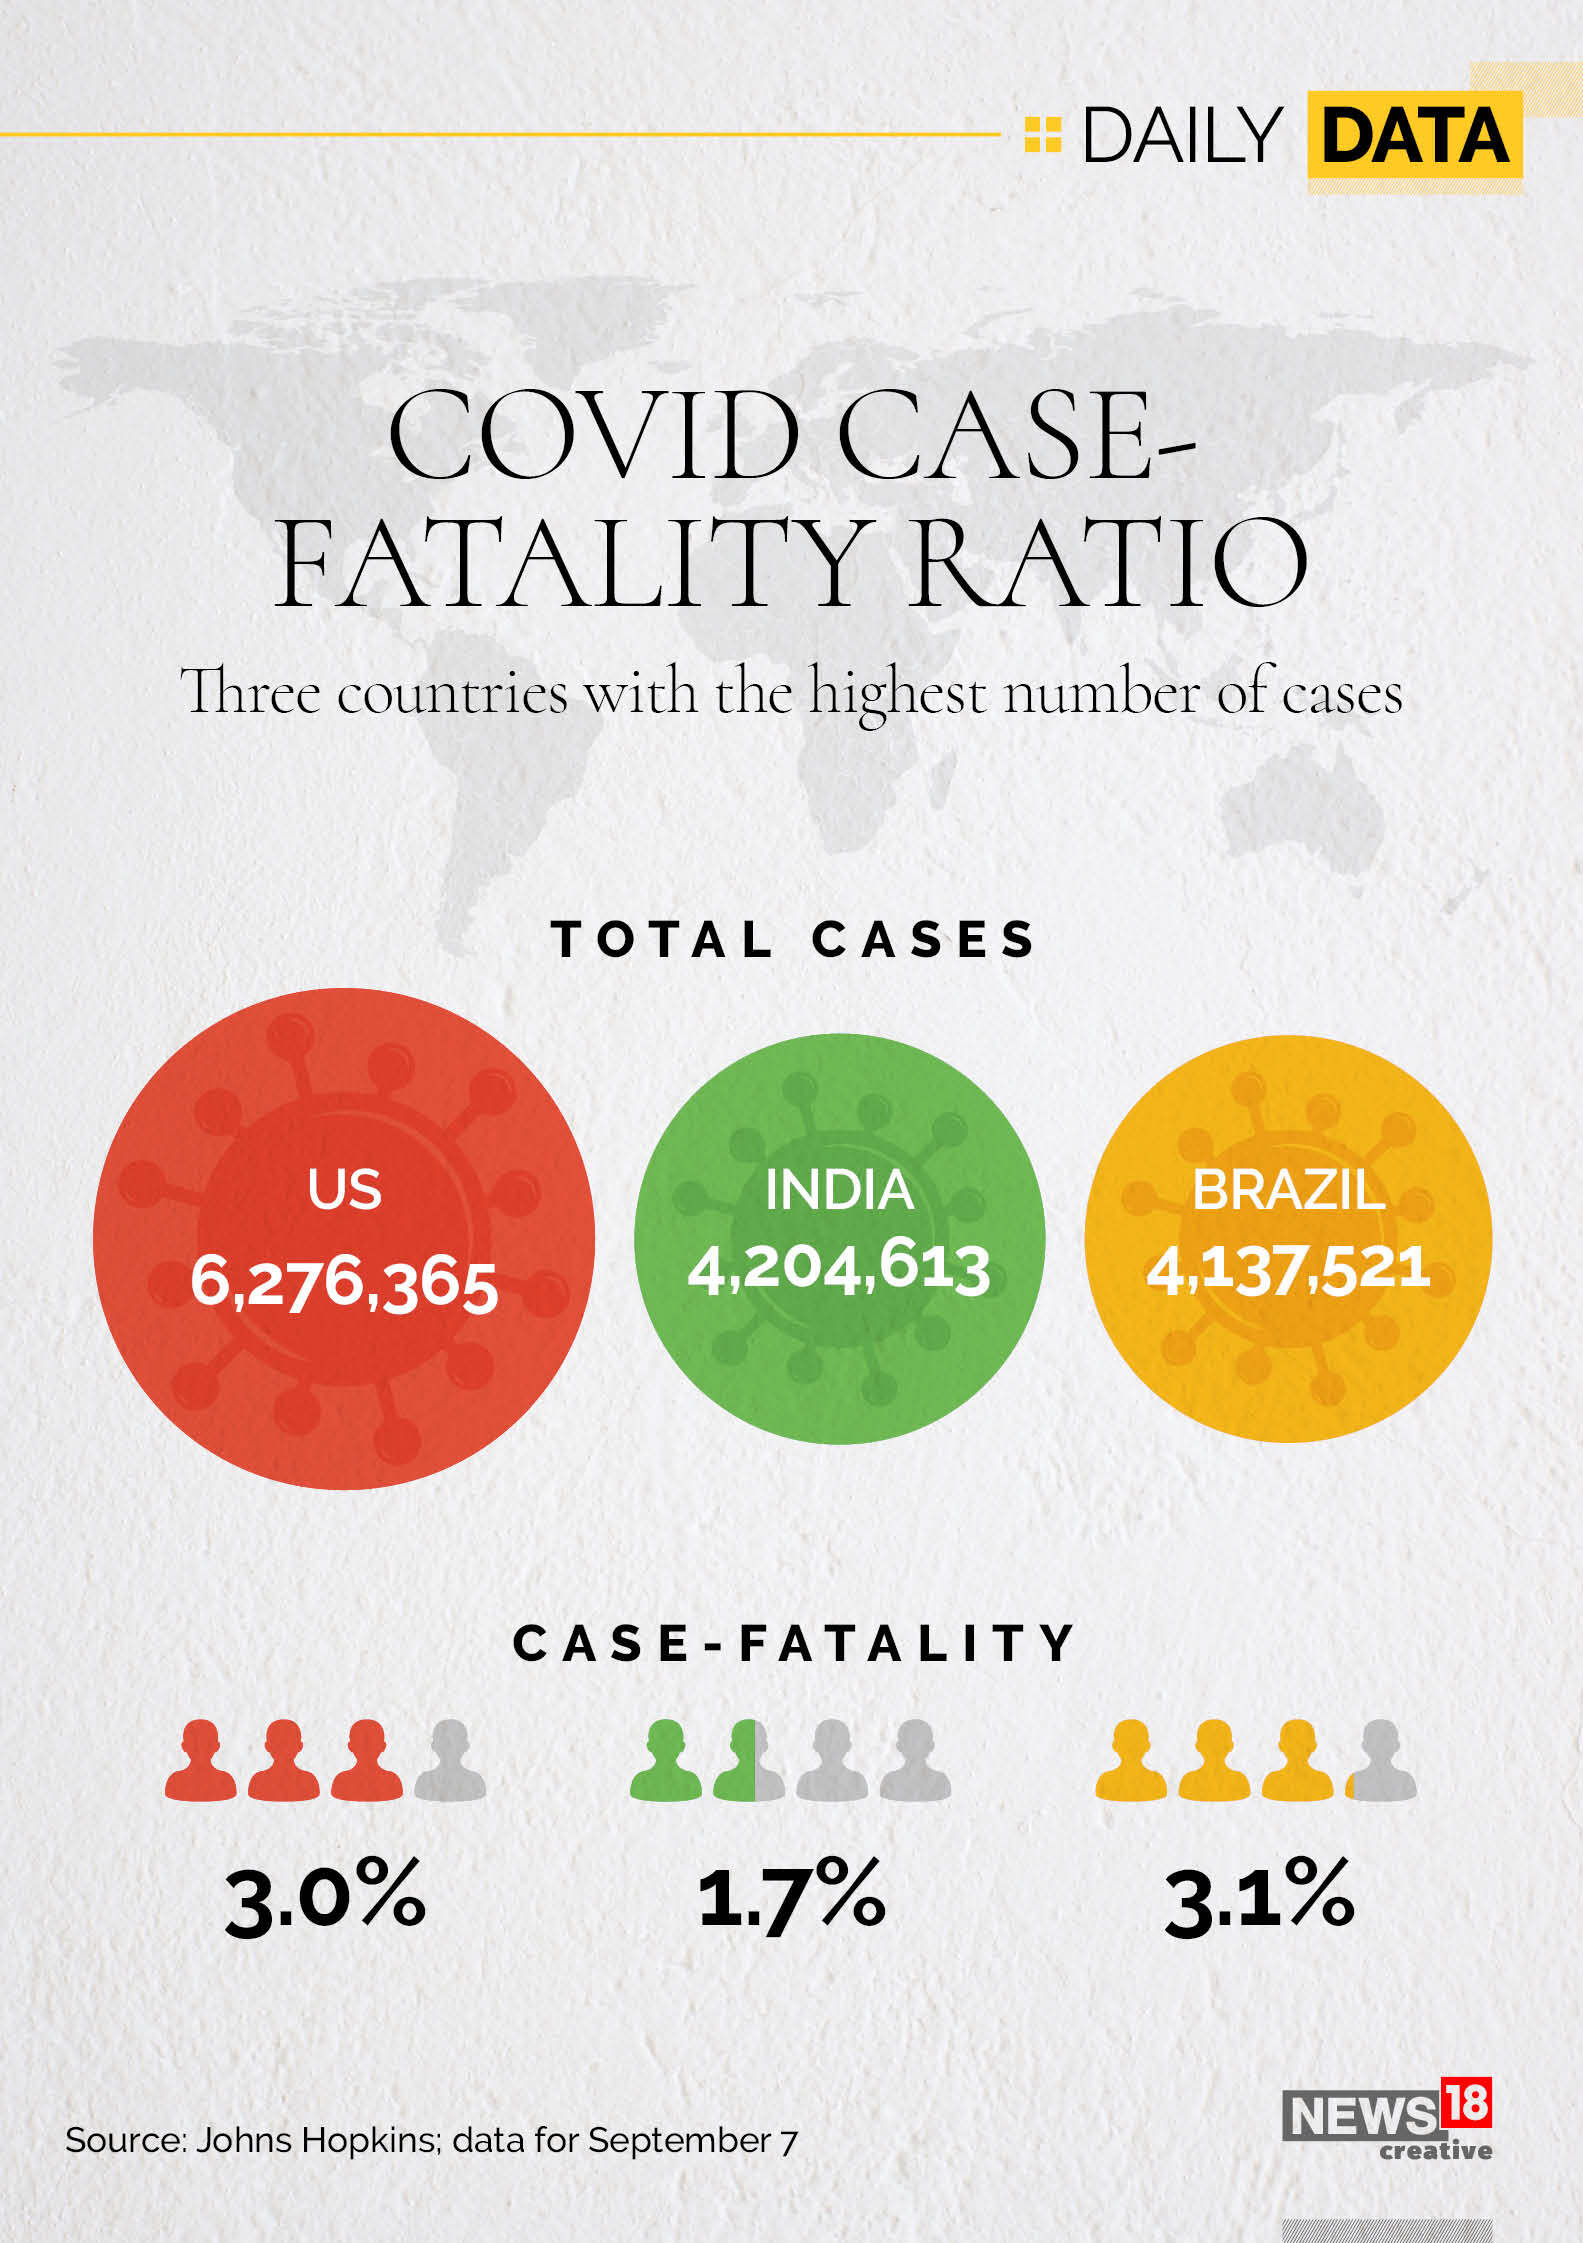 India second in terms of cases, but fatality remains low